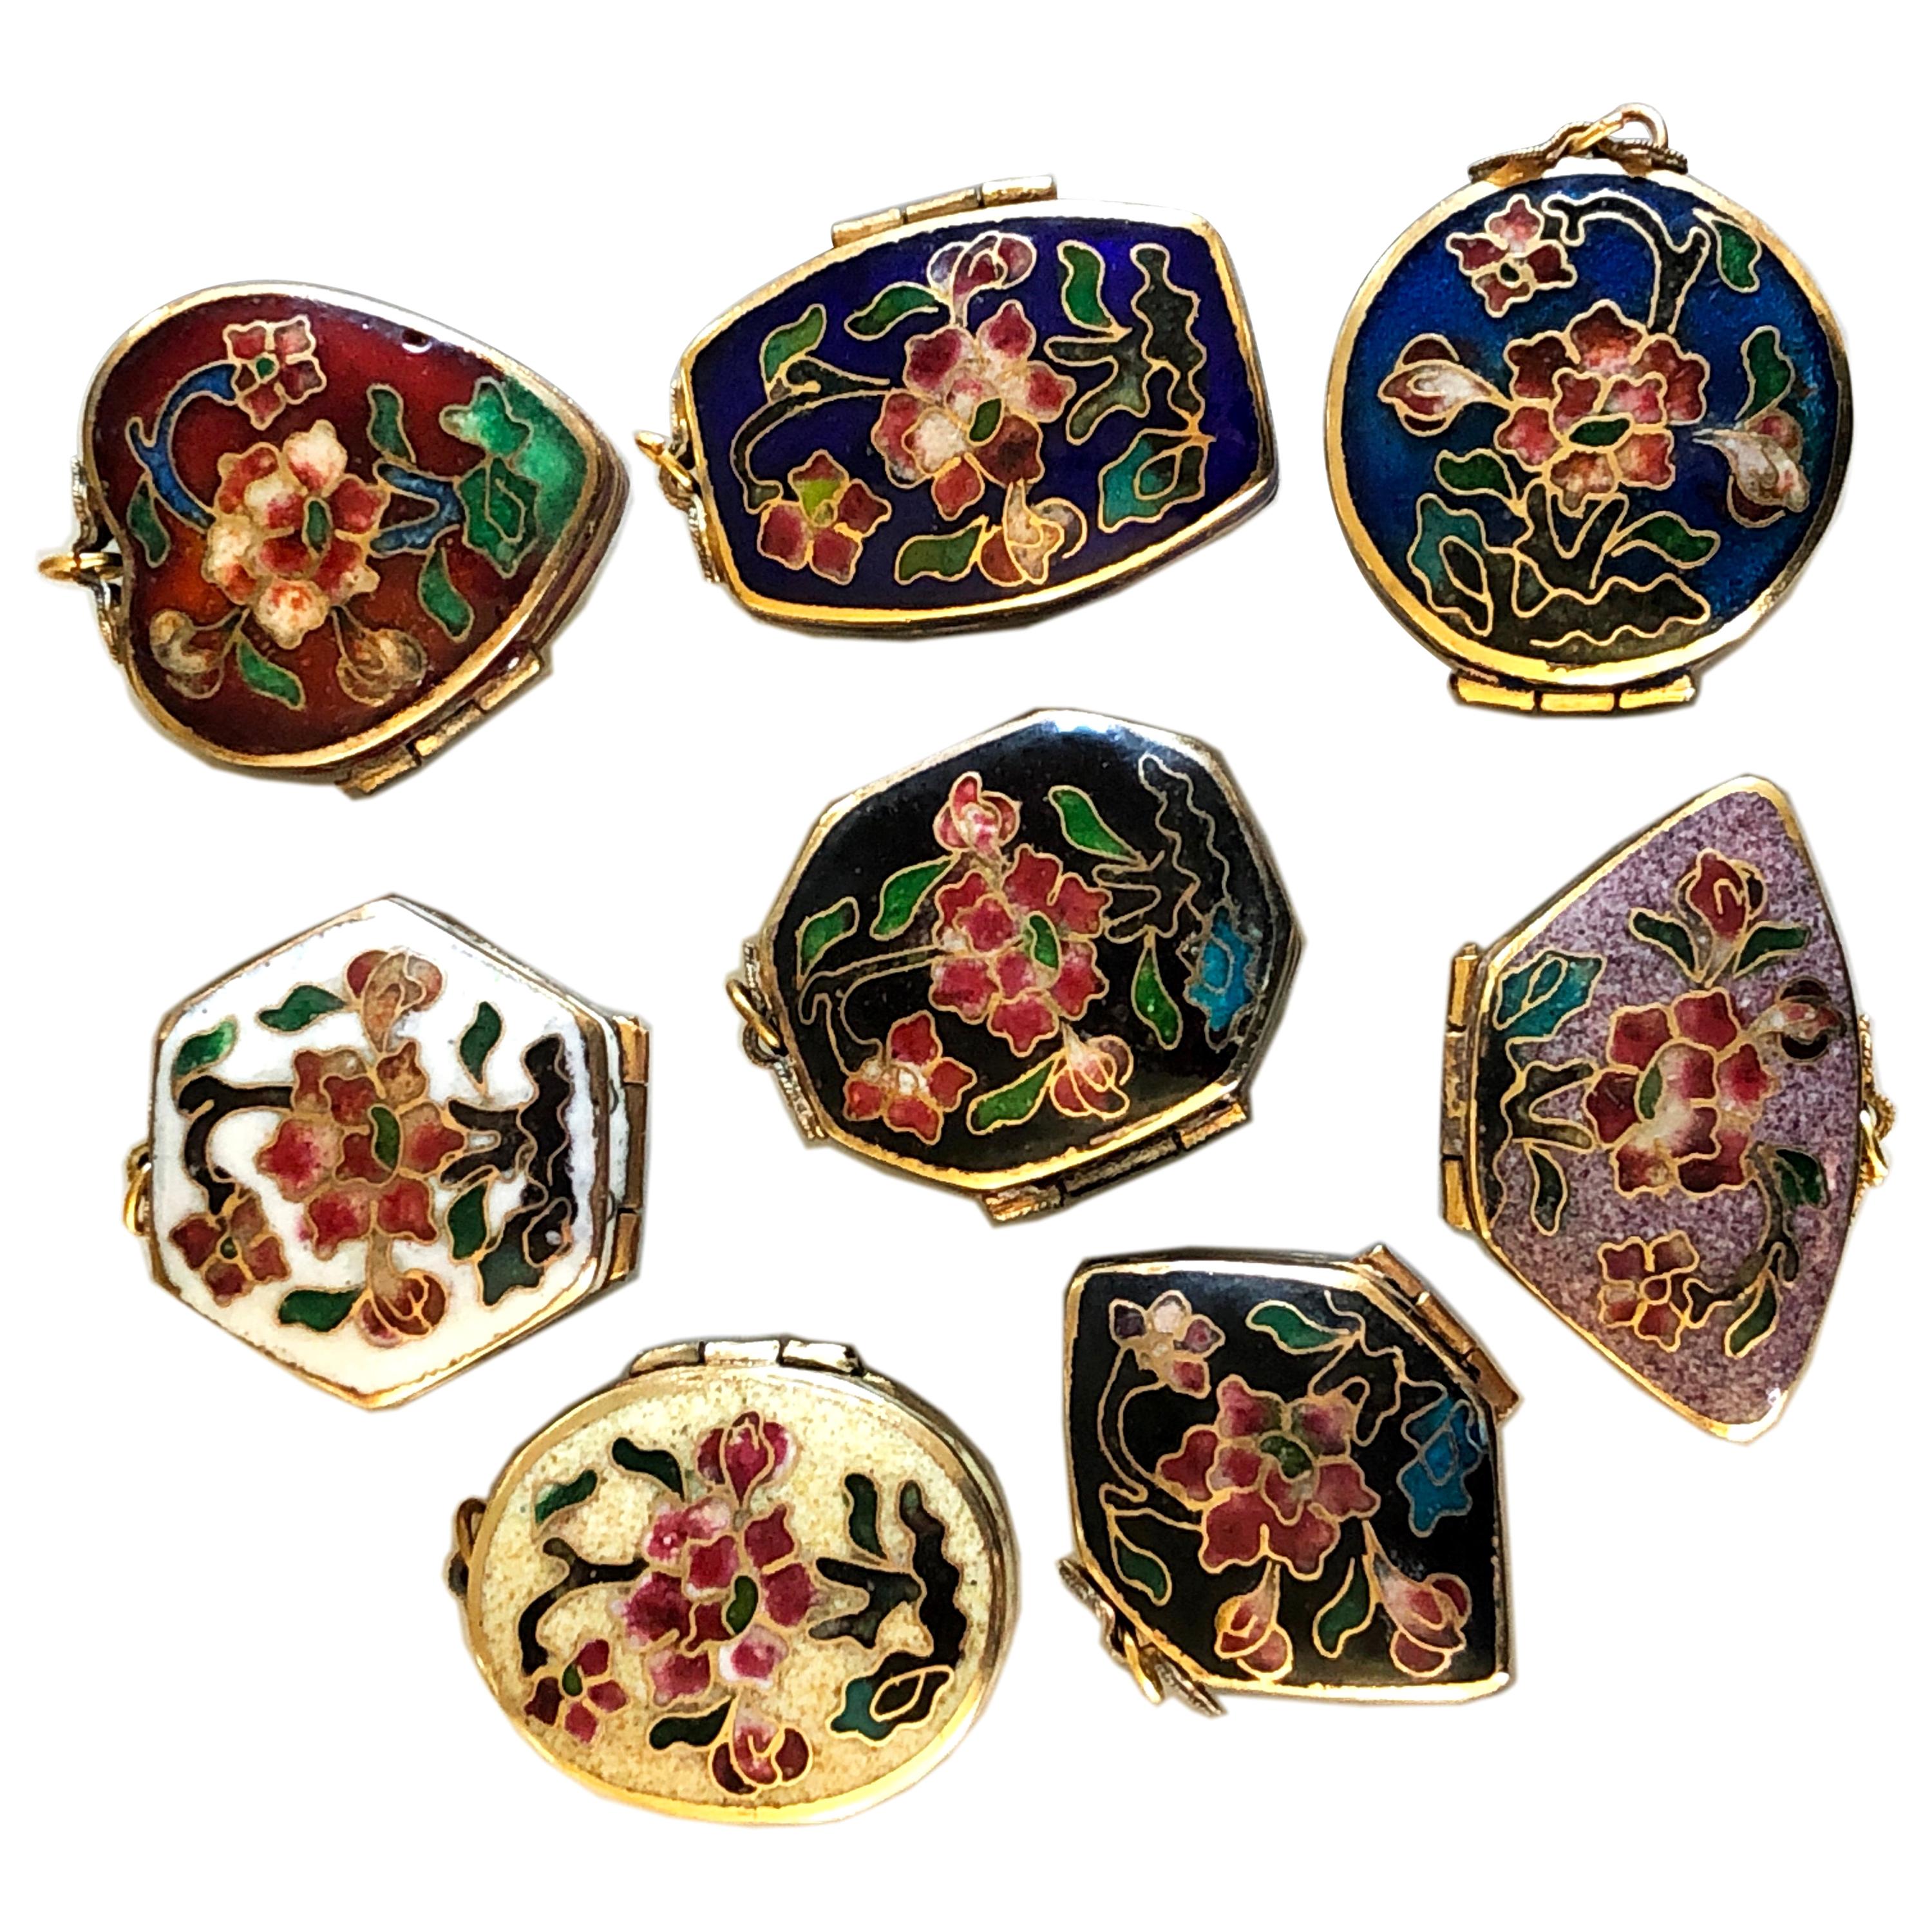 1930 Chinese Export Cloisonné Pill Boxes Collection